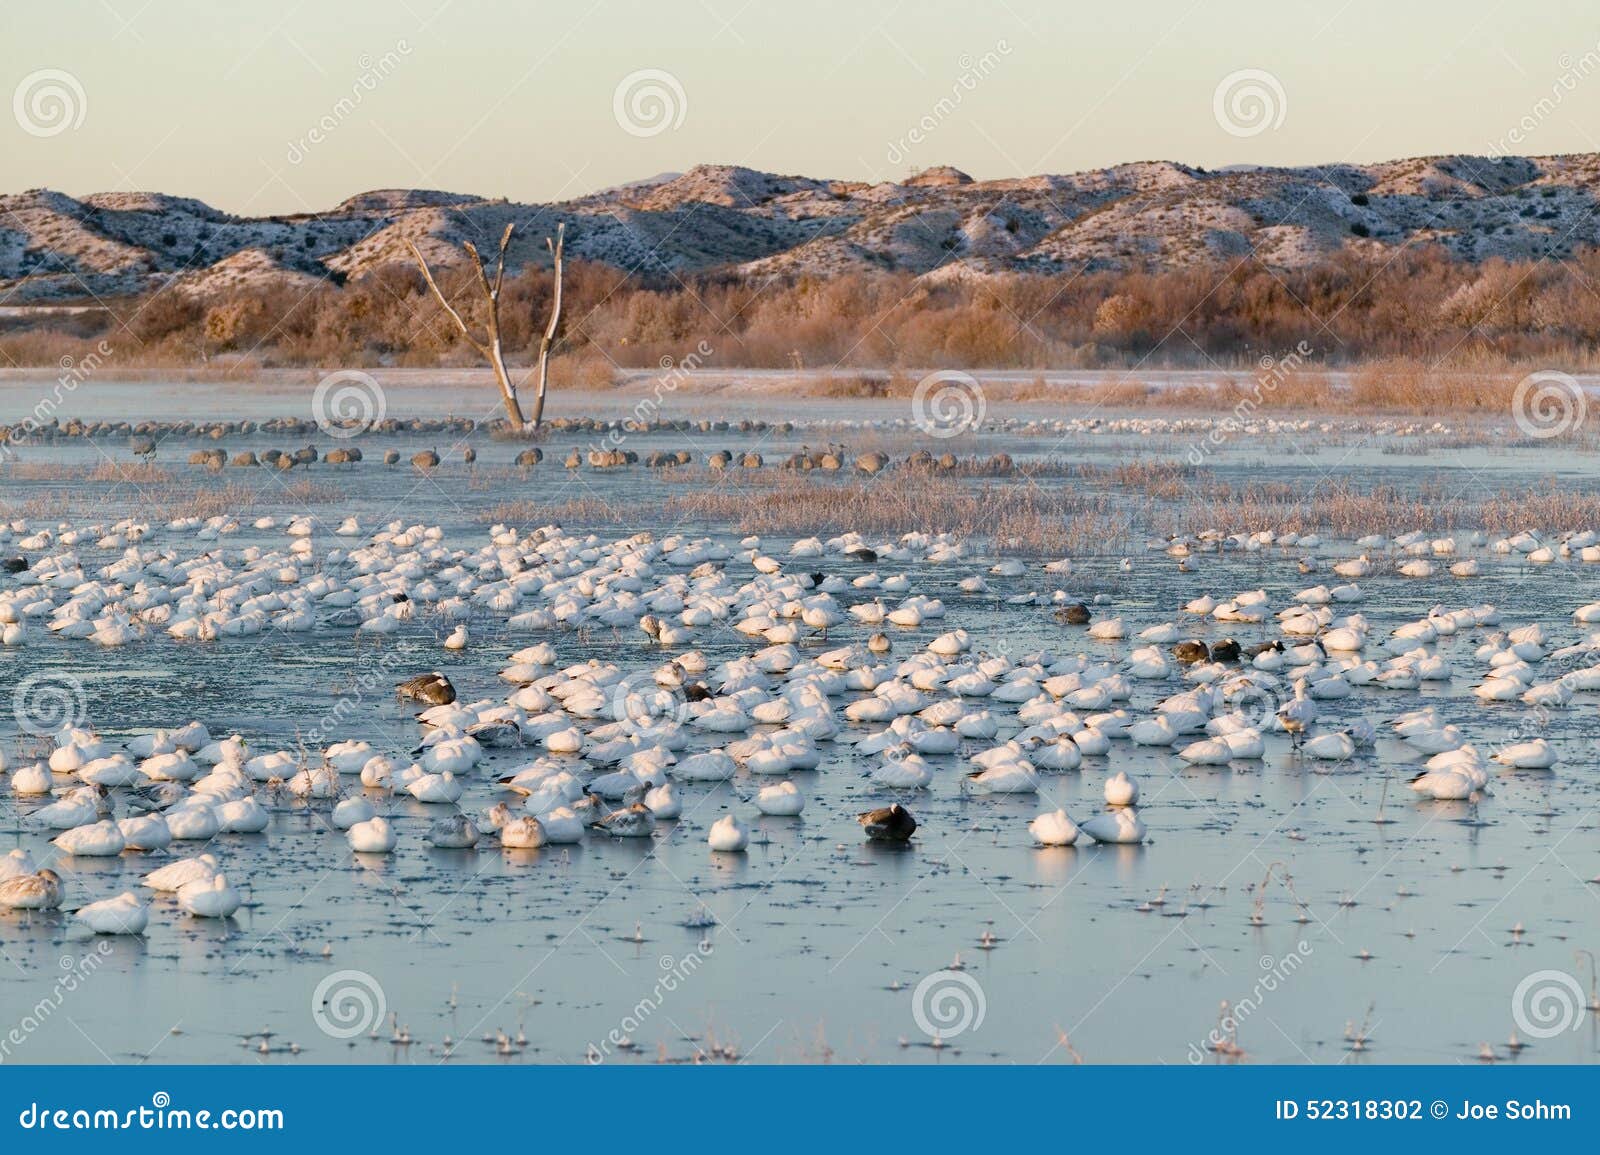 thousands of snow geese and sandhill cranes sit on lake at sunrise after early winter freeze at the bosque del apache national